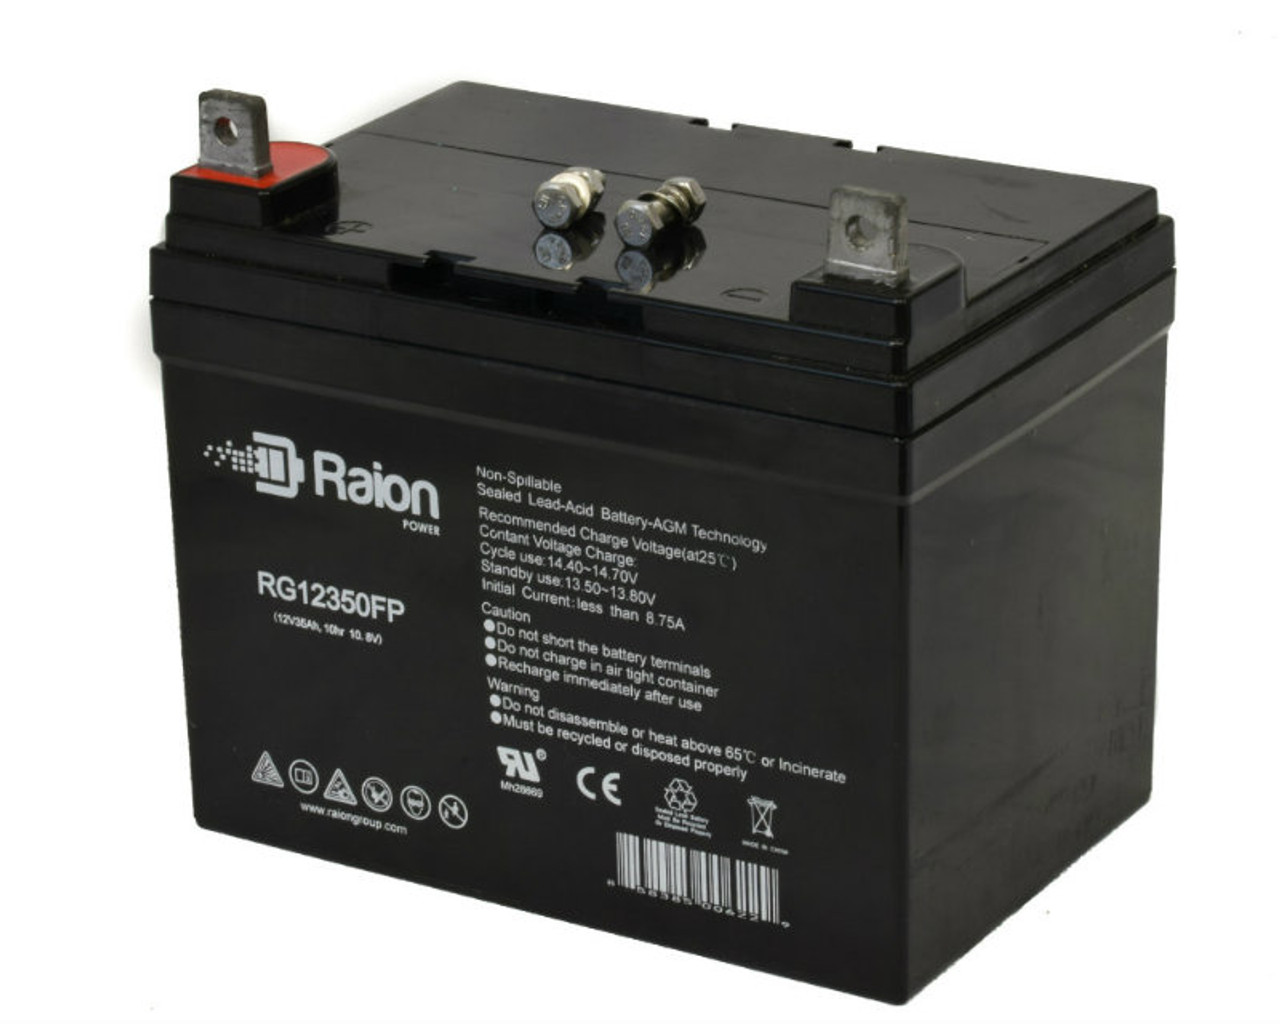 Raion Power Replacement 12V 35Ah RG12350FP Battery for Yard Man W844H